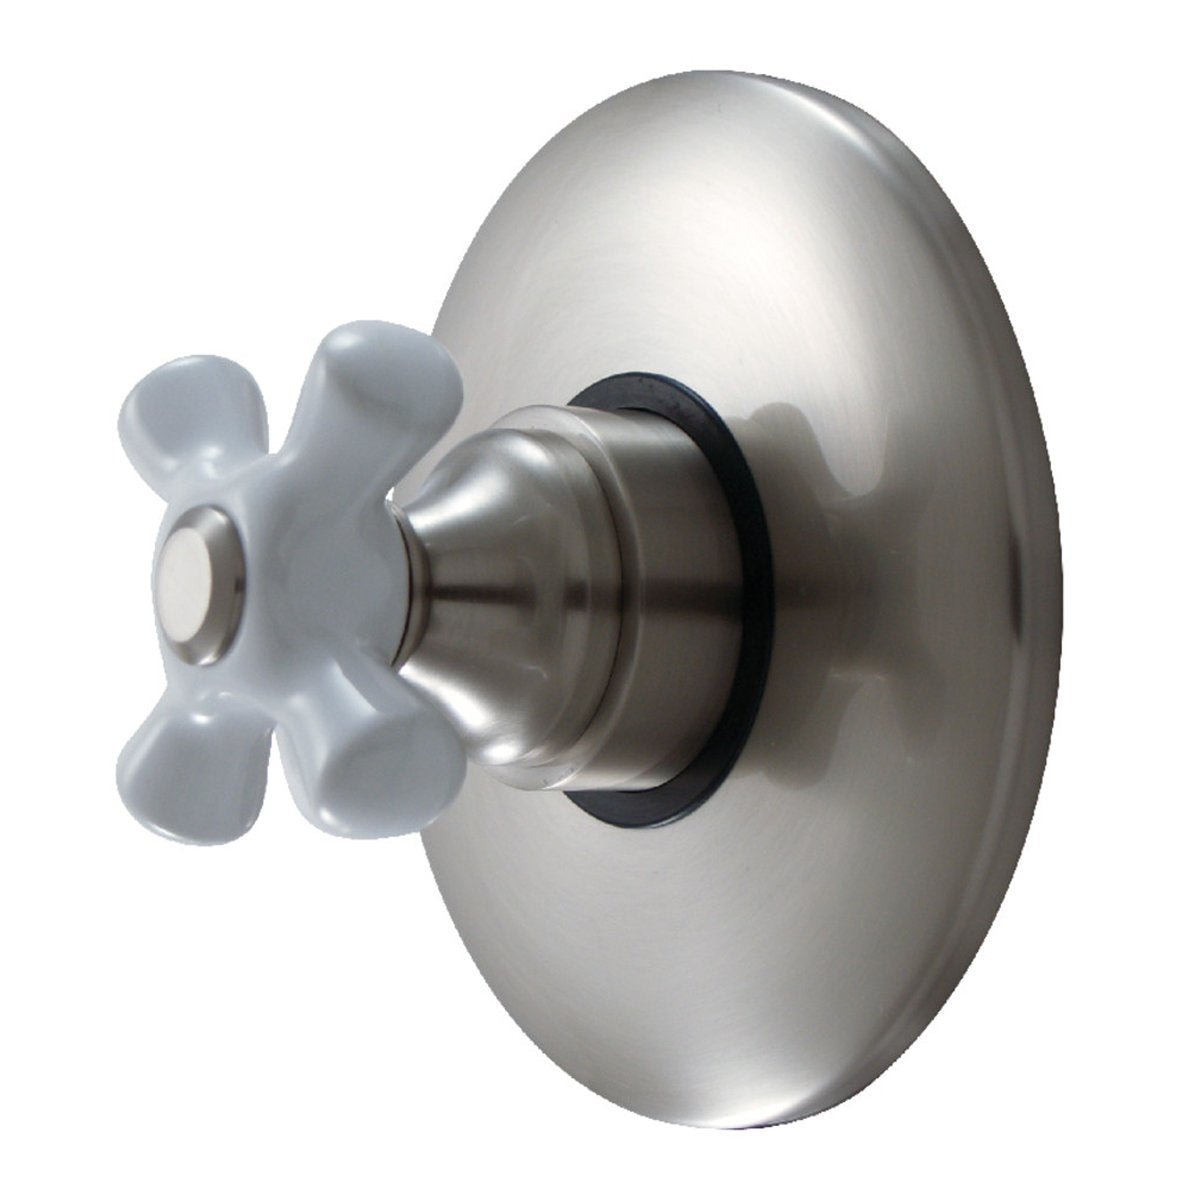 Kingston Brass Volume Control With Cross Handle in Brushed Nickel